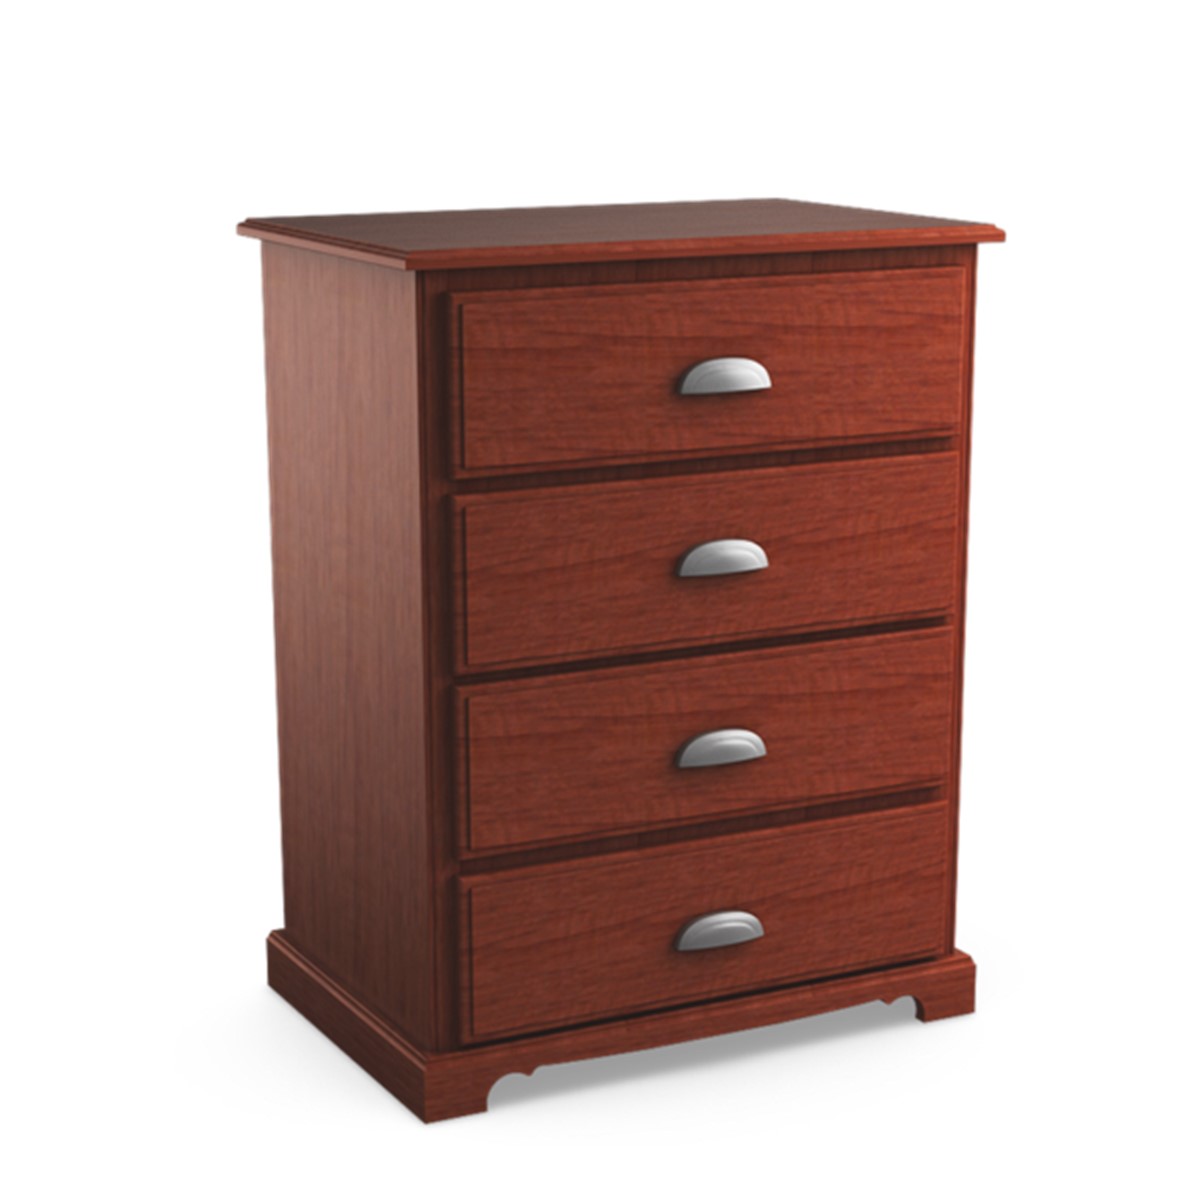 Georgetown: Four Drawer Chest